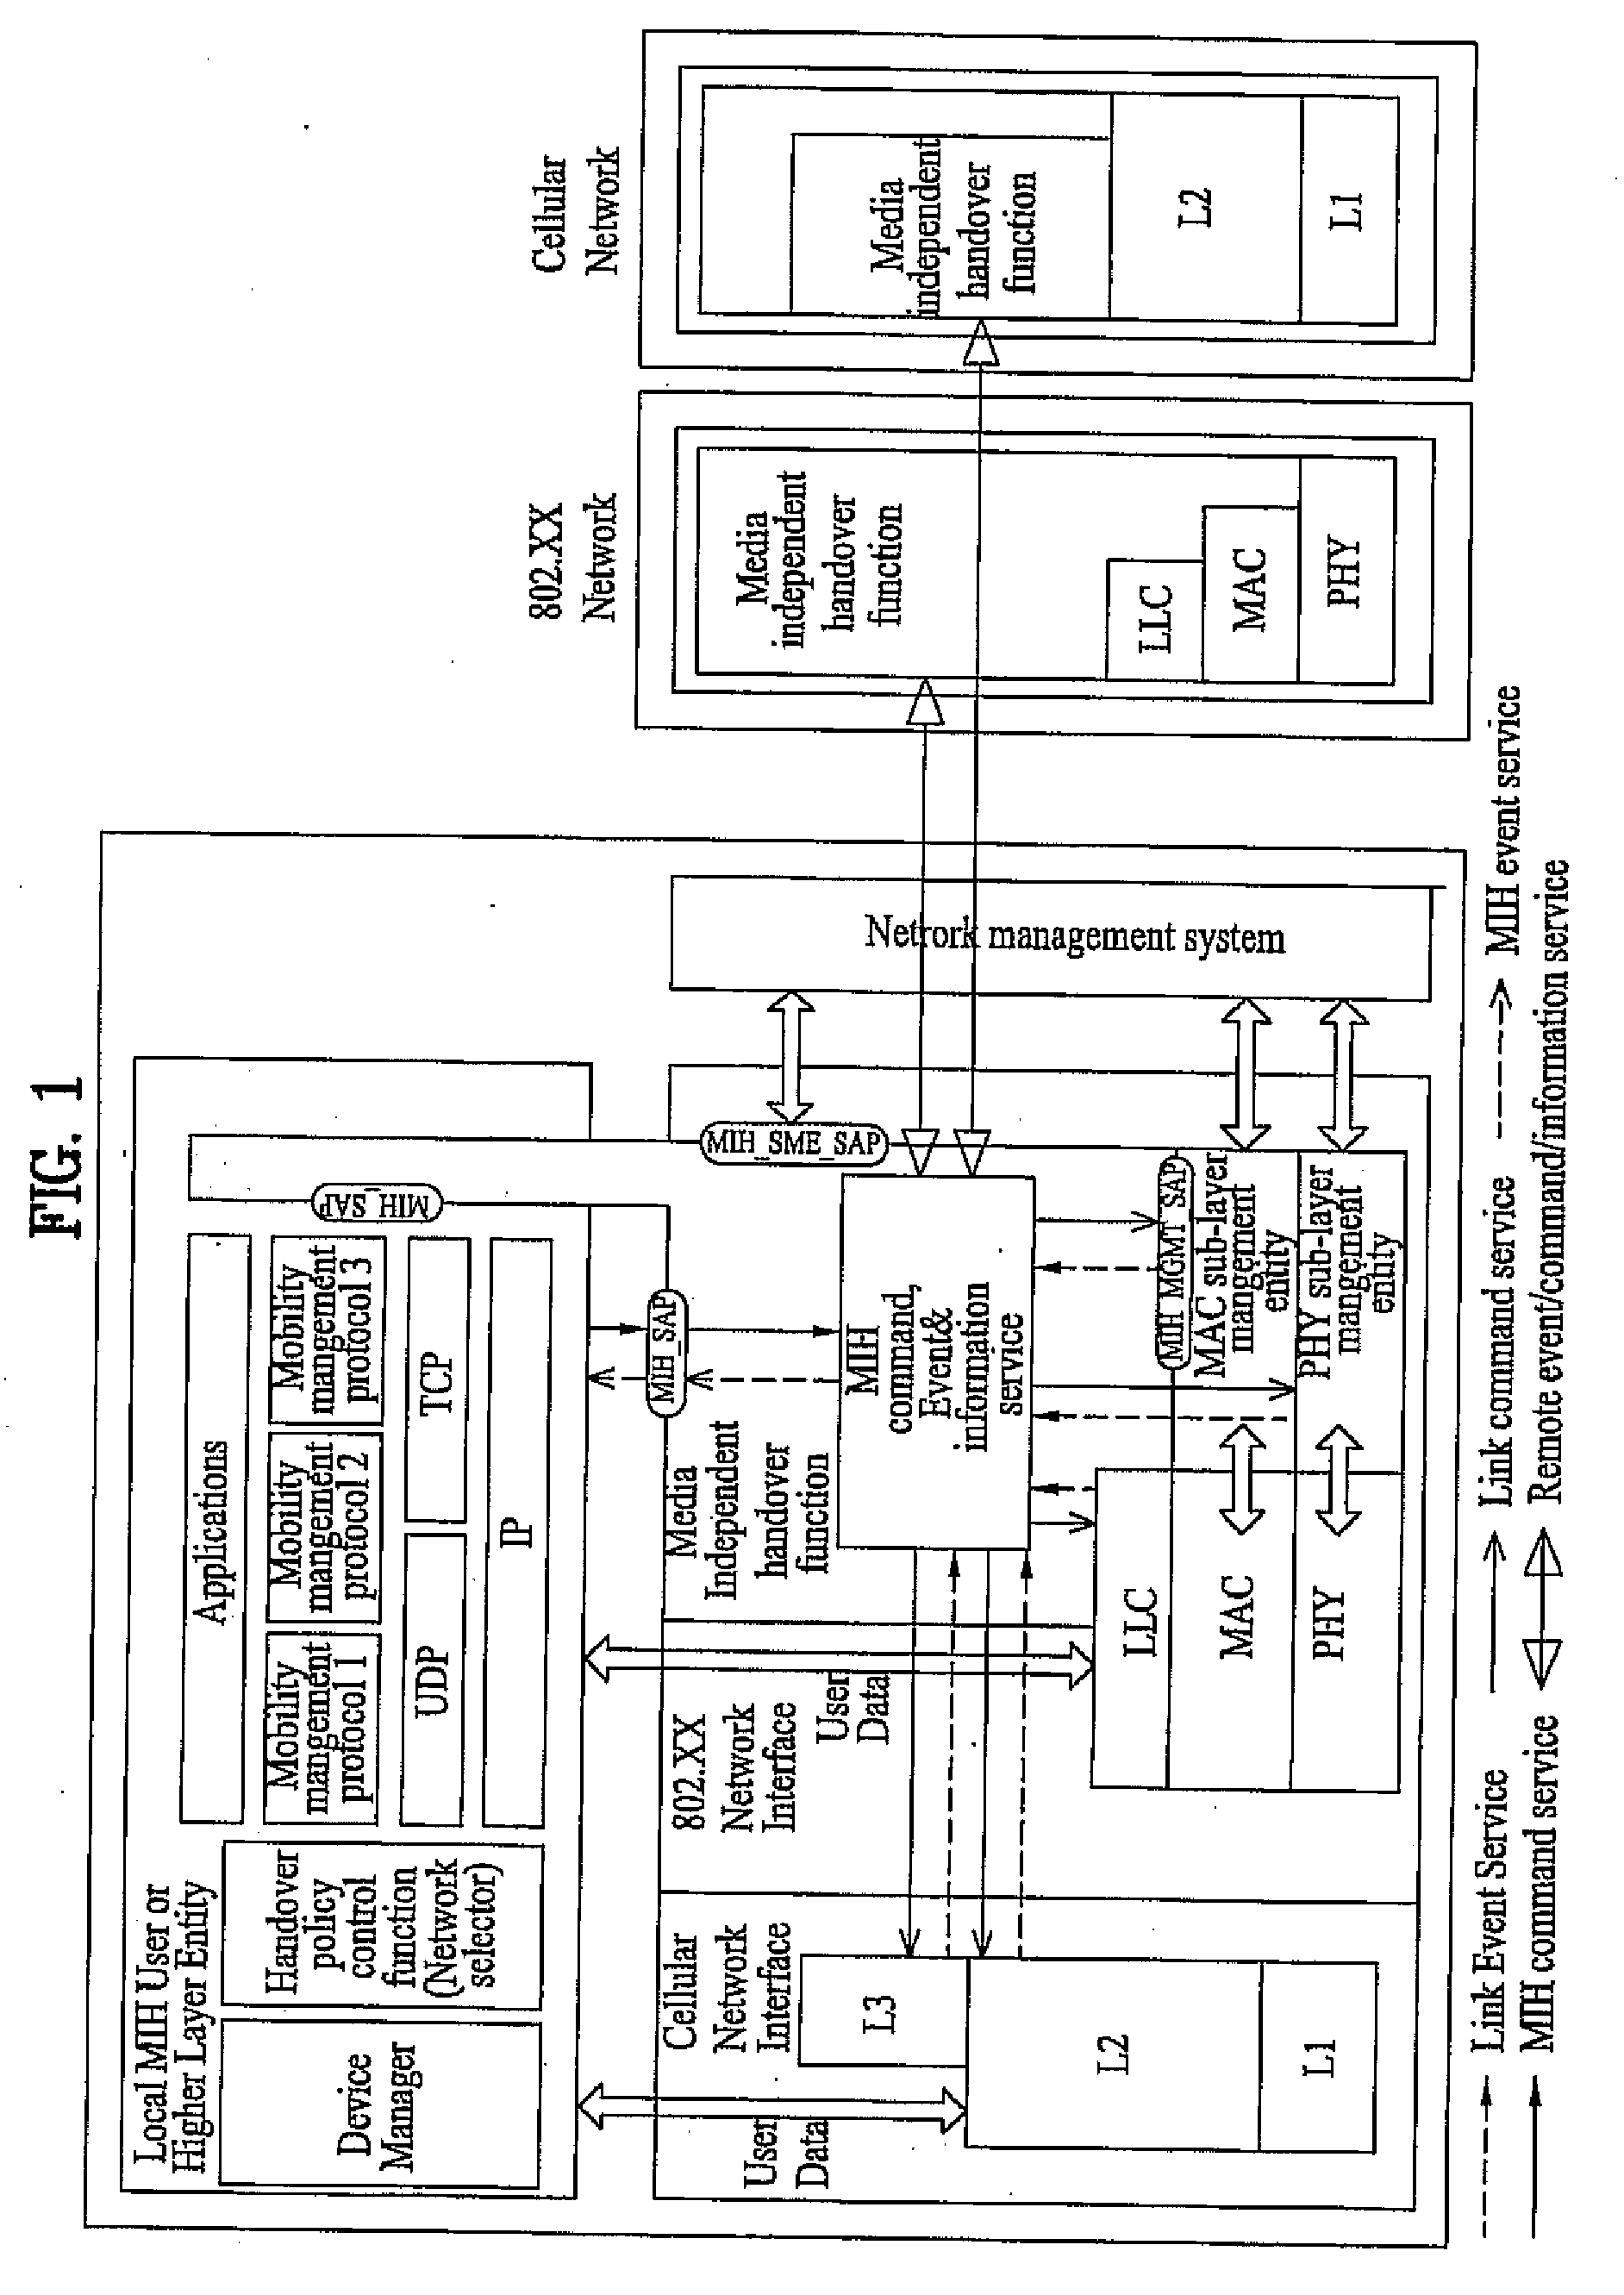 Method of supporting media independent handover with resource management function in a mobile communication system